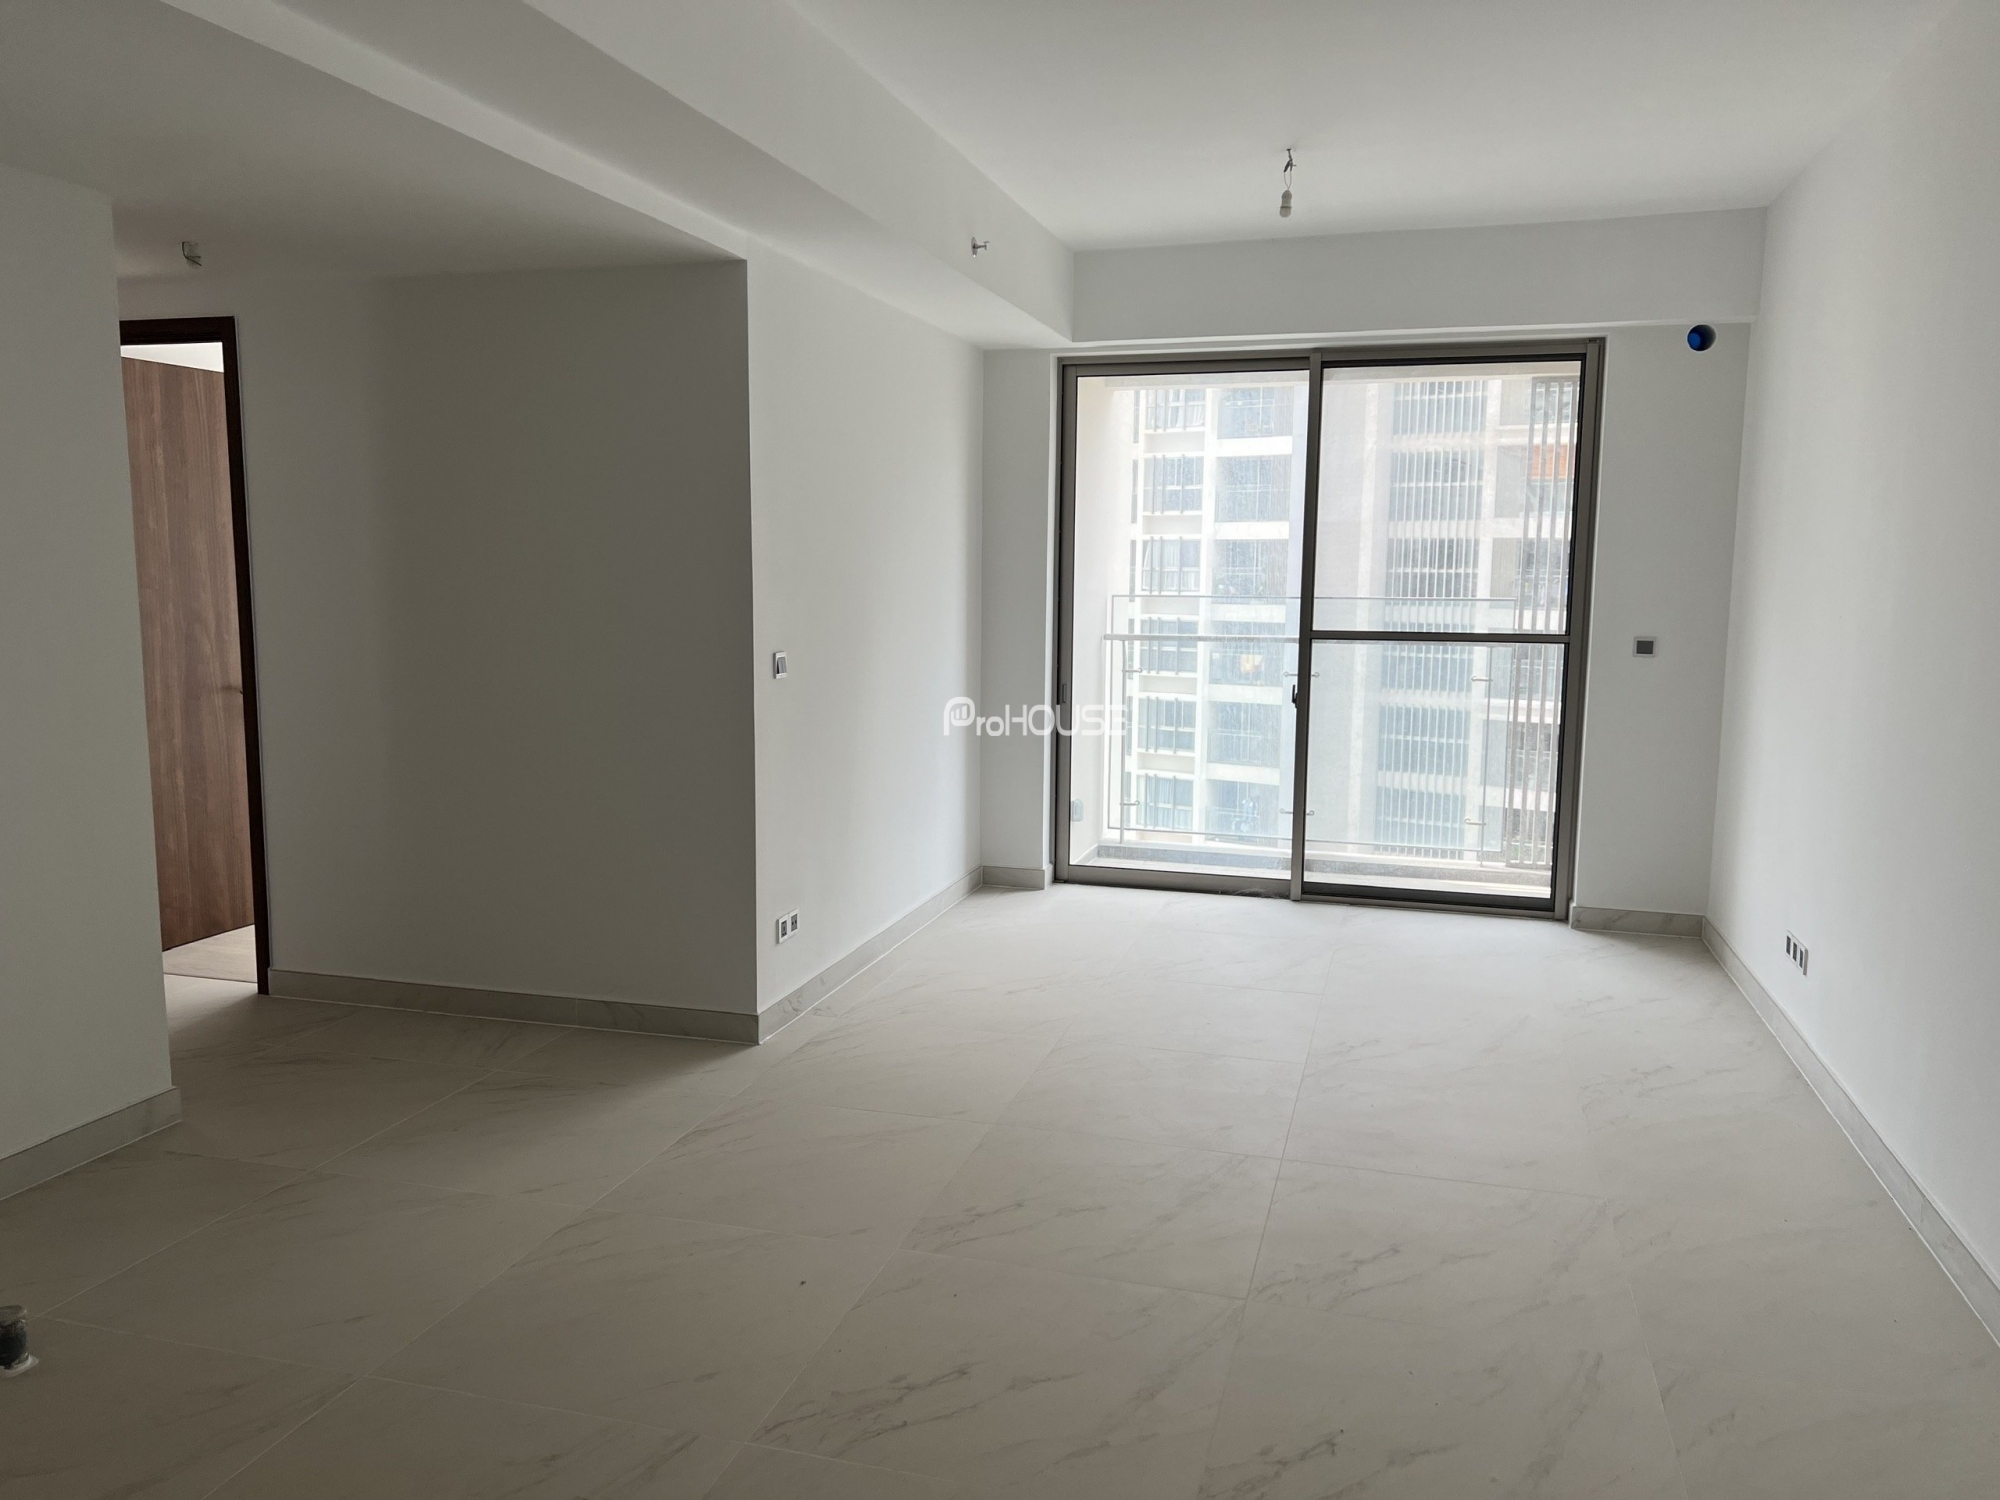 Unfurnished 2-bedroom apartment for sale in Midtown M7 at cheap price